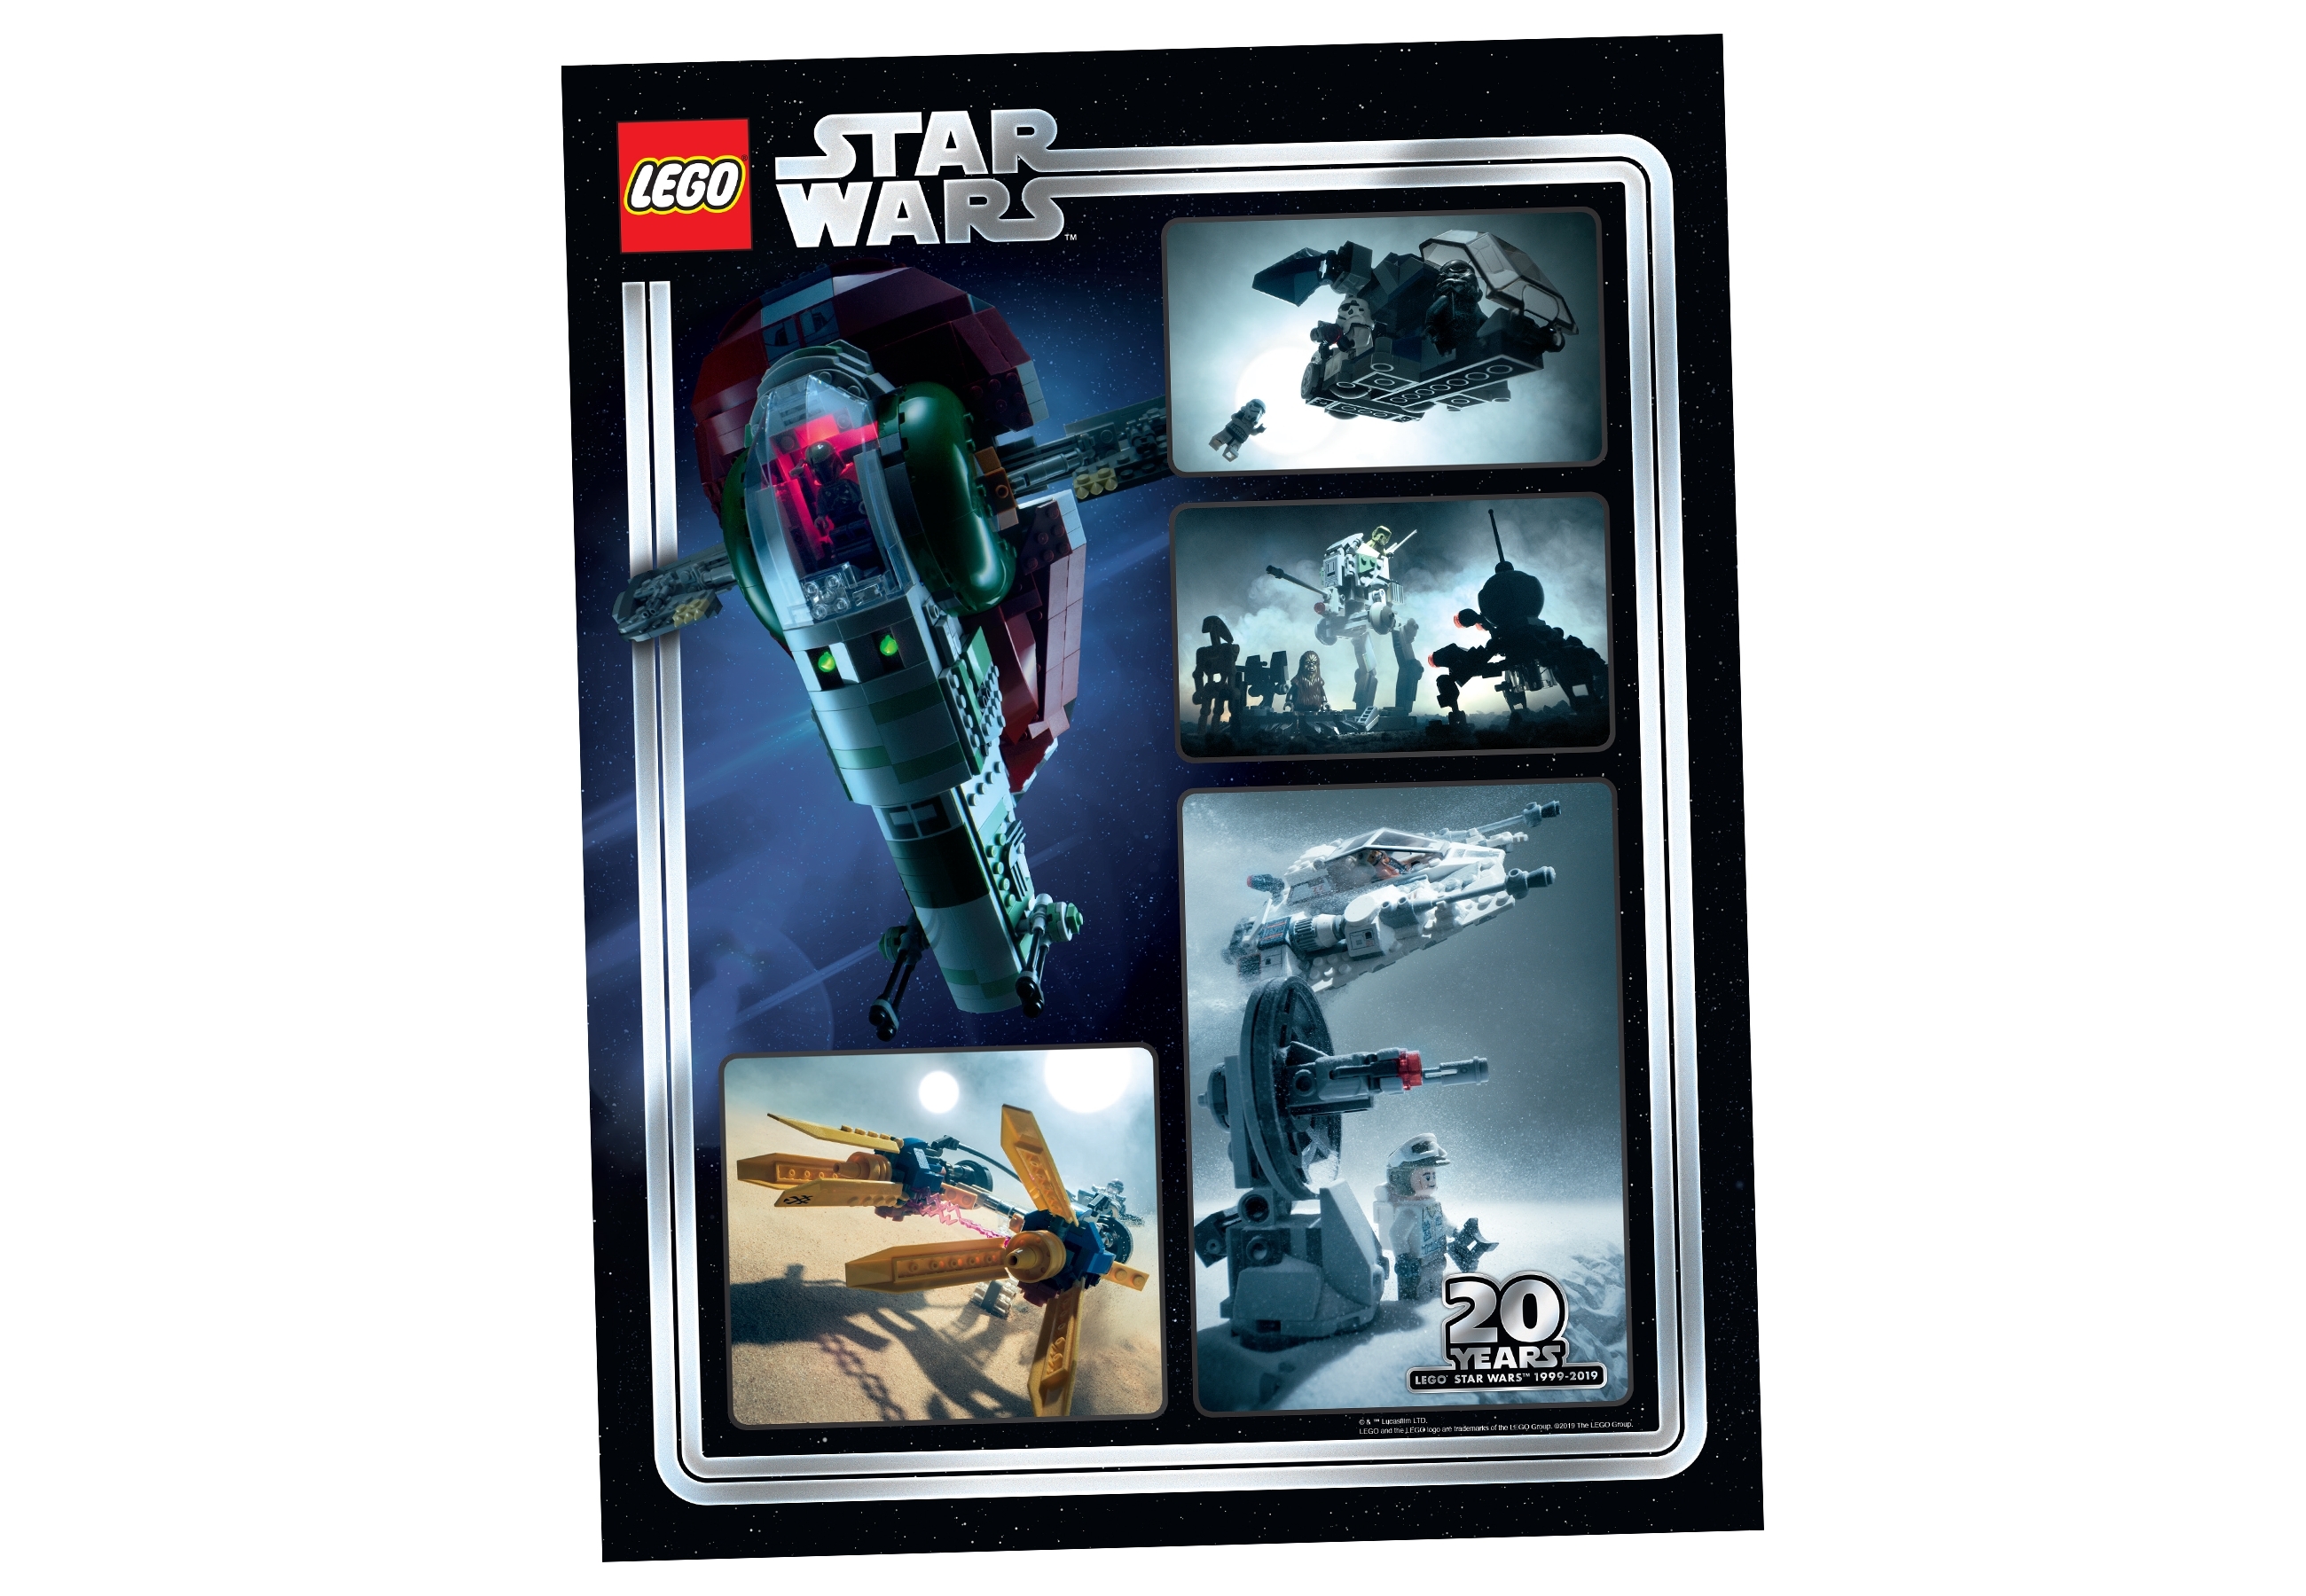 STARS WARS LEGO EPISODE 5 MOVIE POSTER PICTURE PRINT Sizes A5 to A0 **NEW**